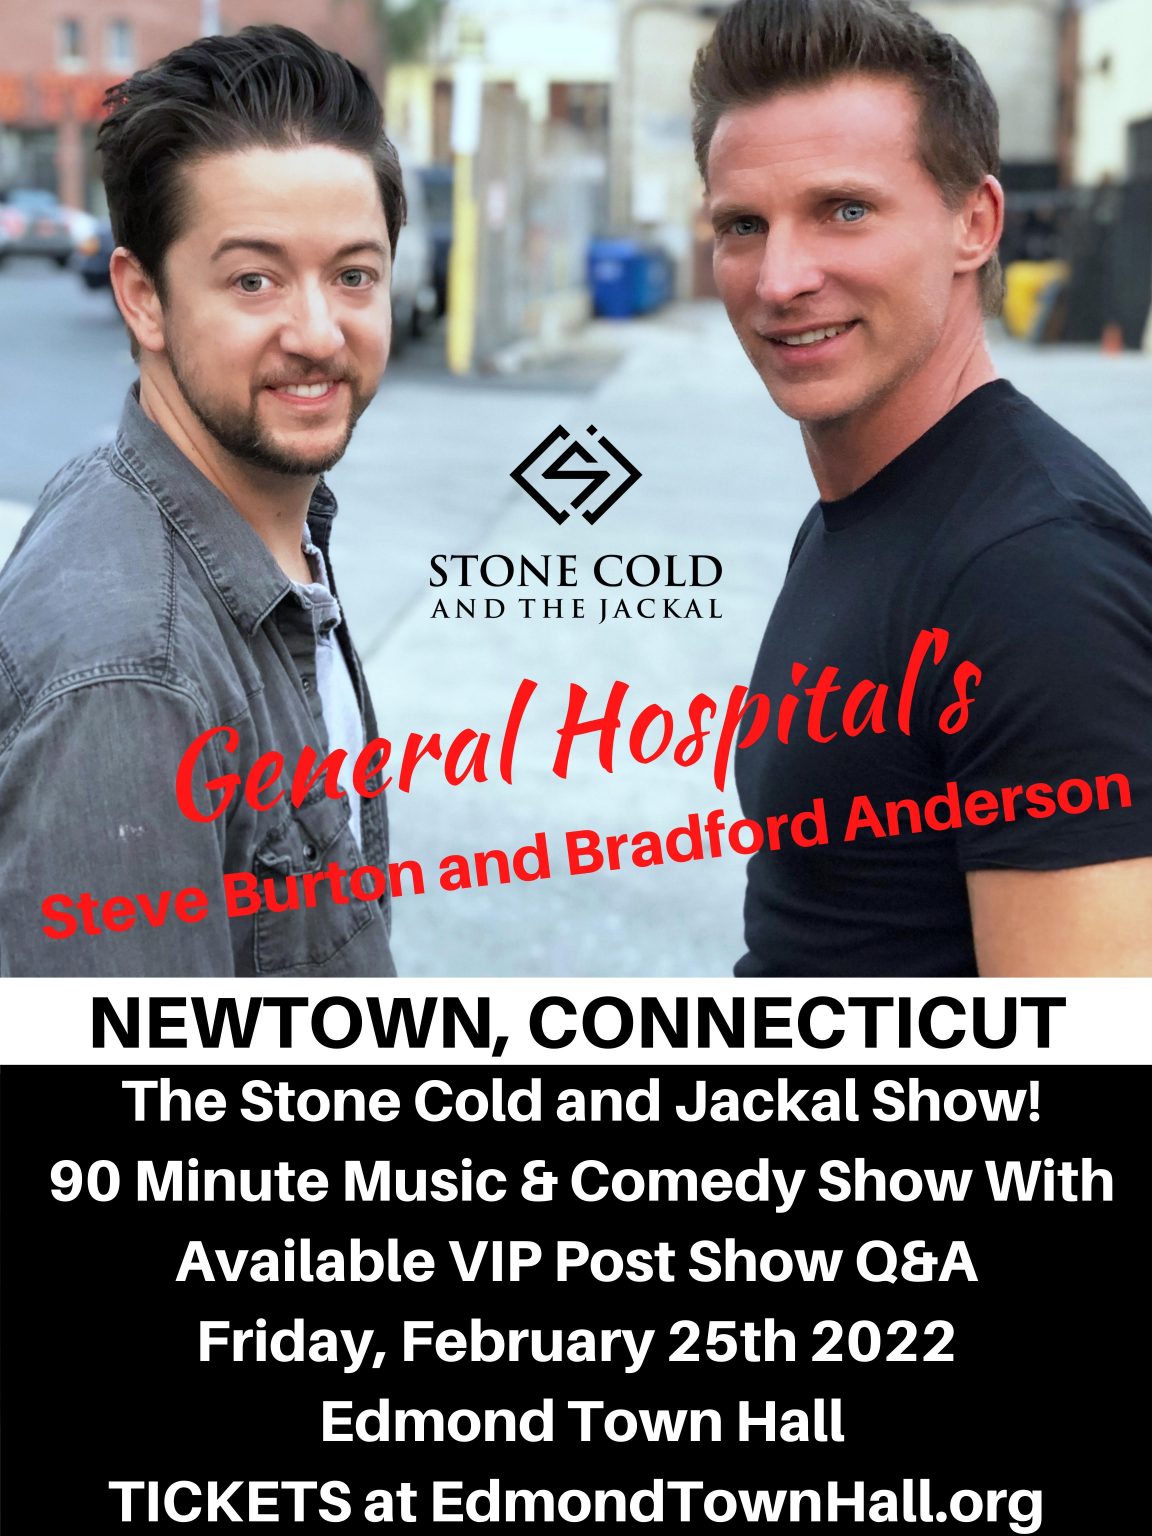 Stone Cold and the Jackal Show YES, the Show is ON! Edmond Town Hall